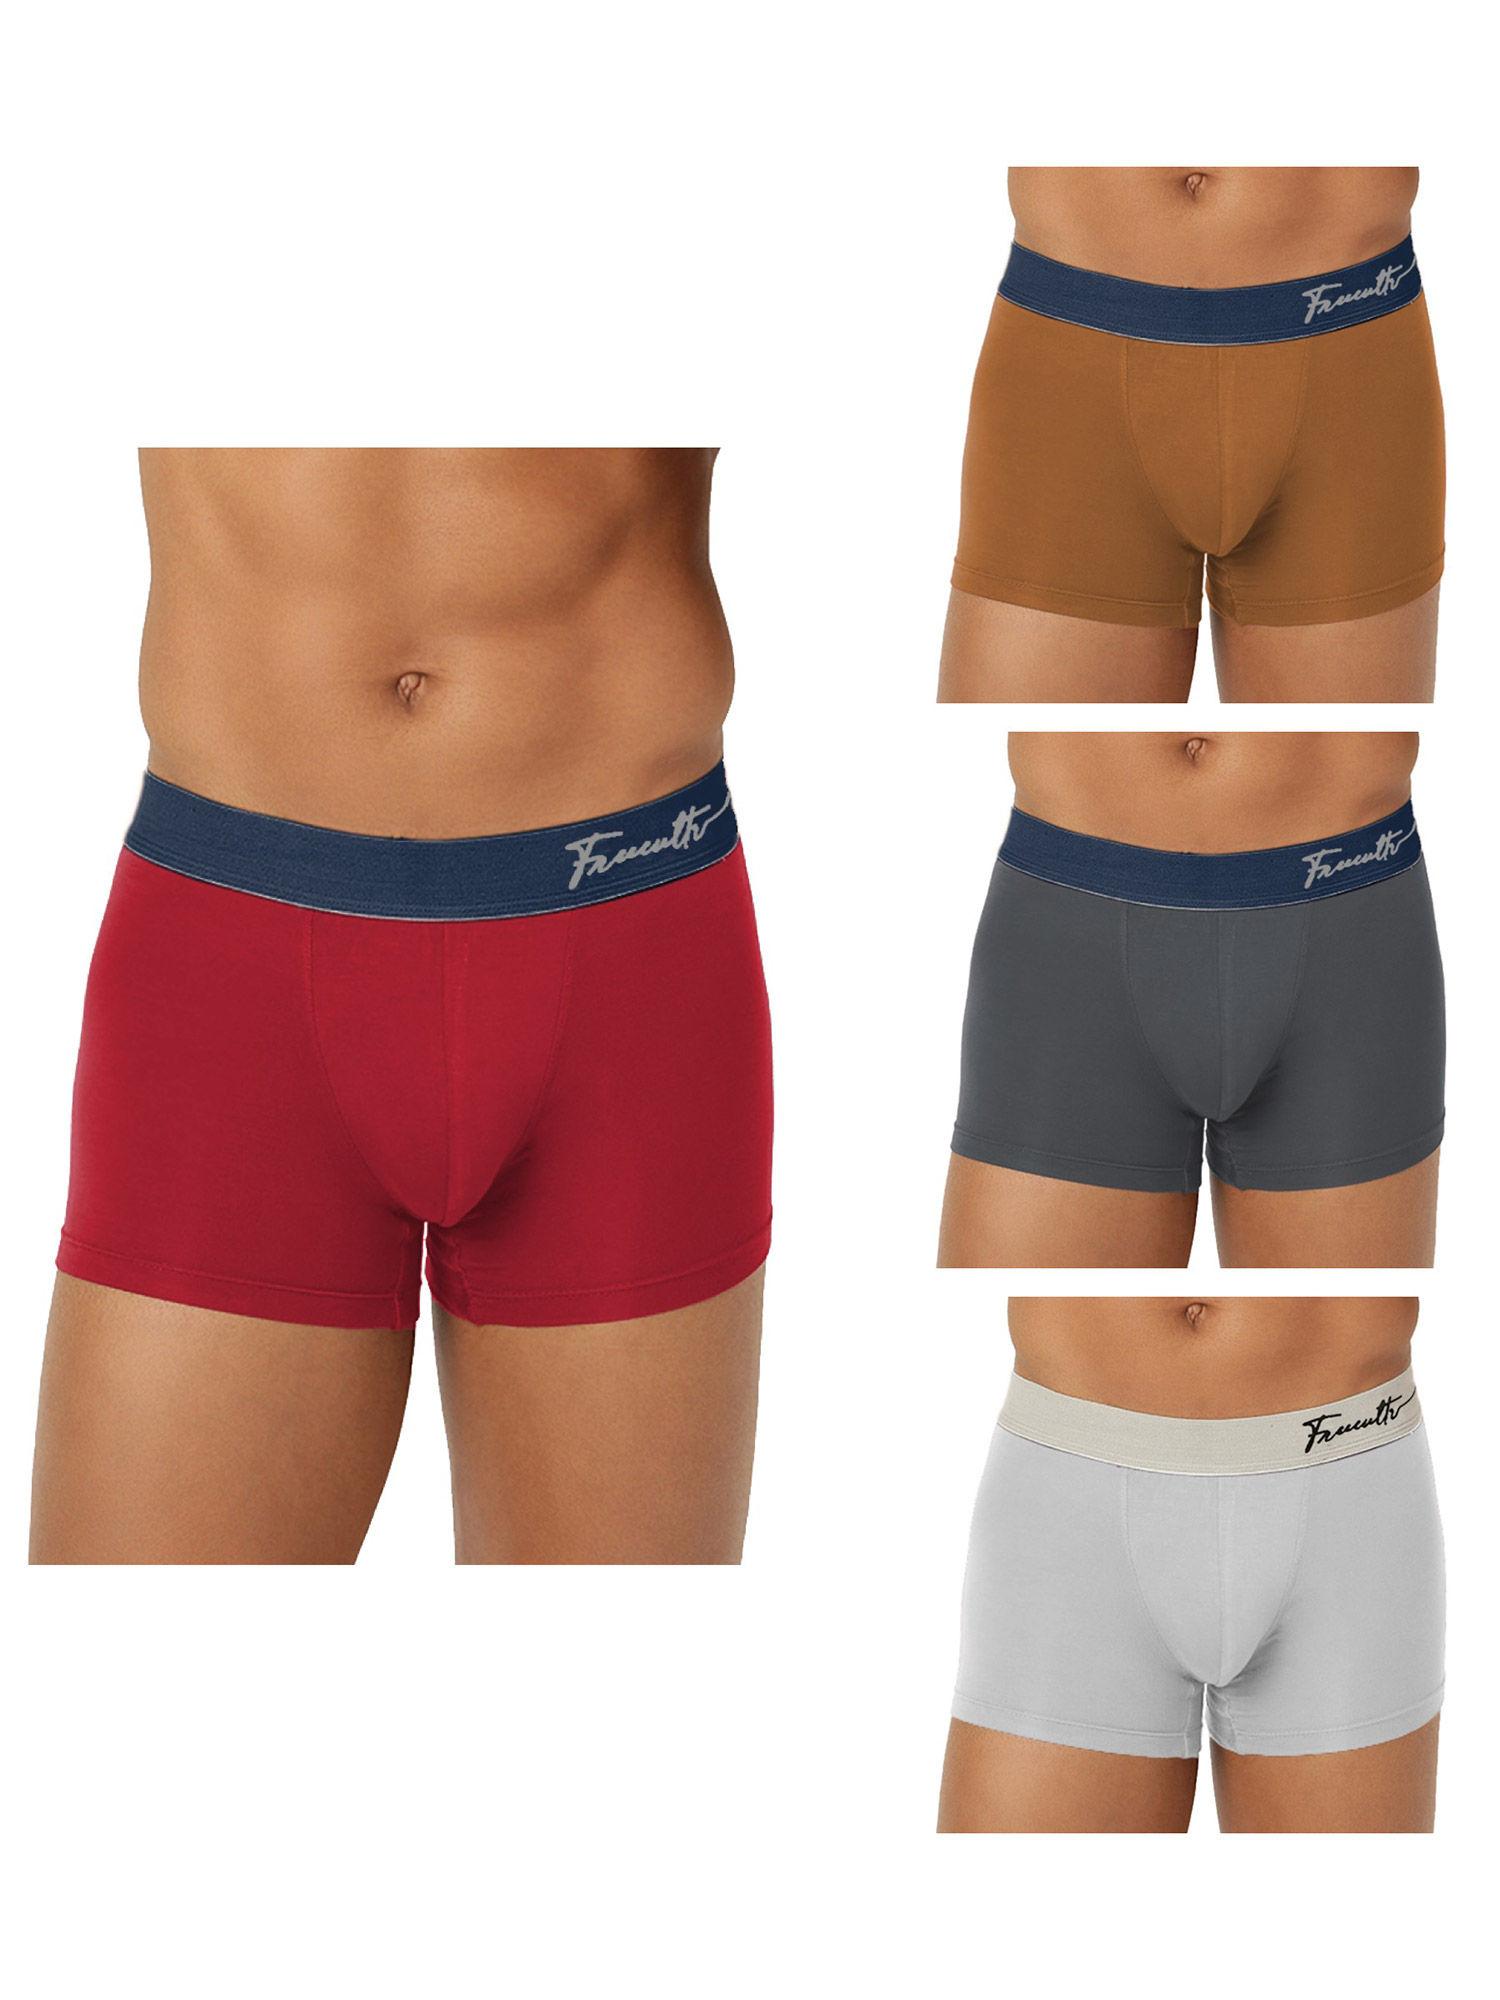 mens underwear anti chaffing sweat-proof micromodal trunks (pack of 4)